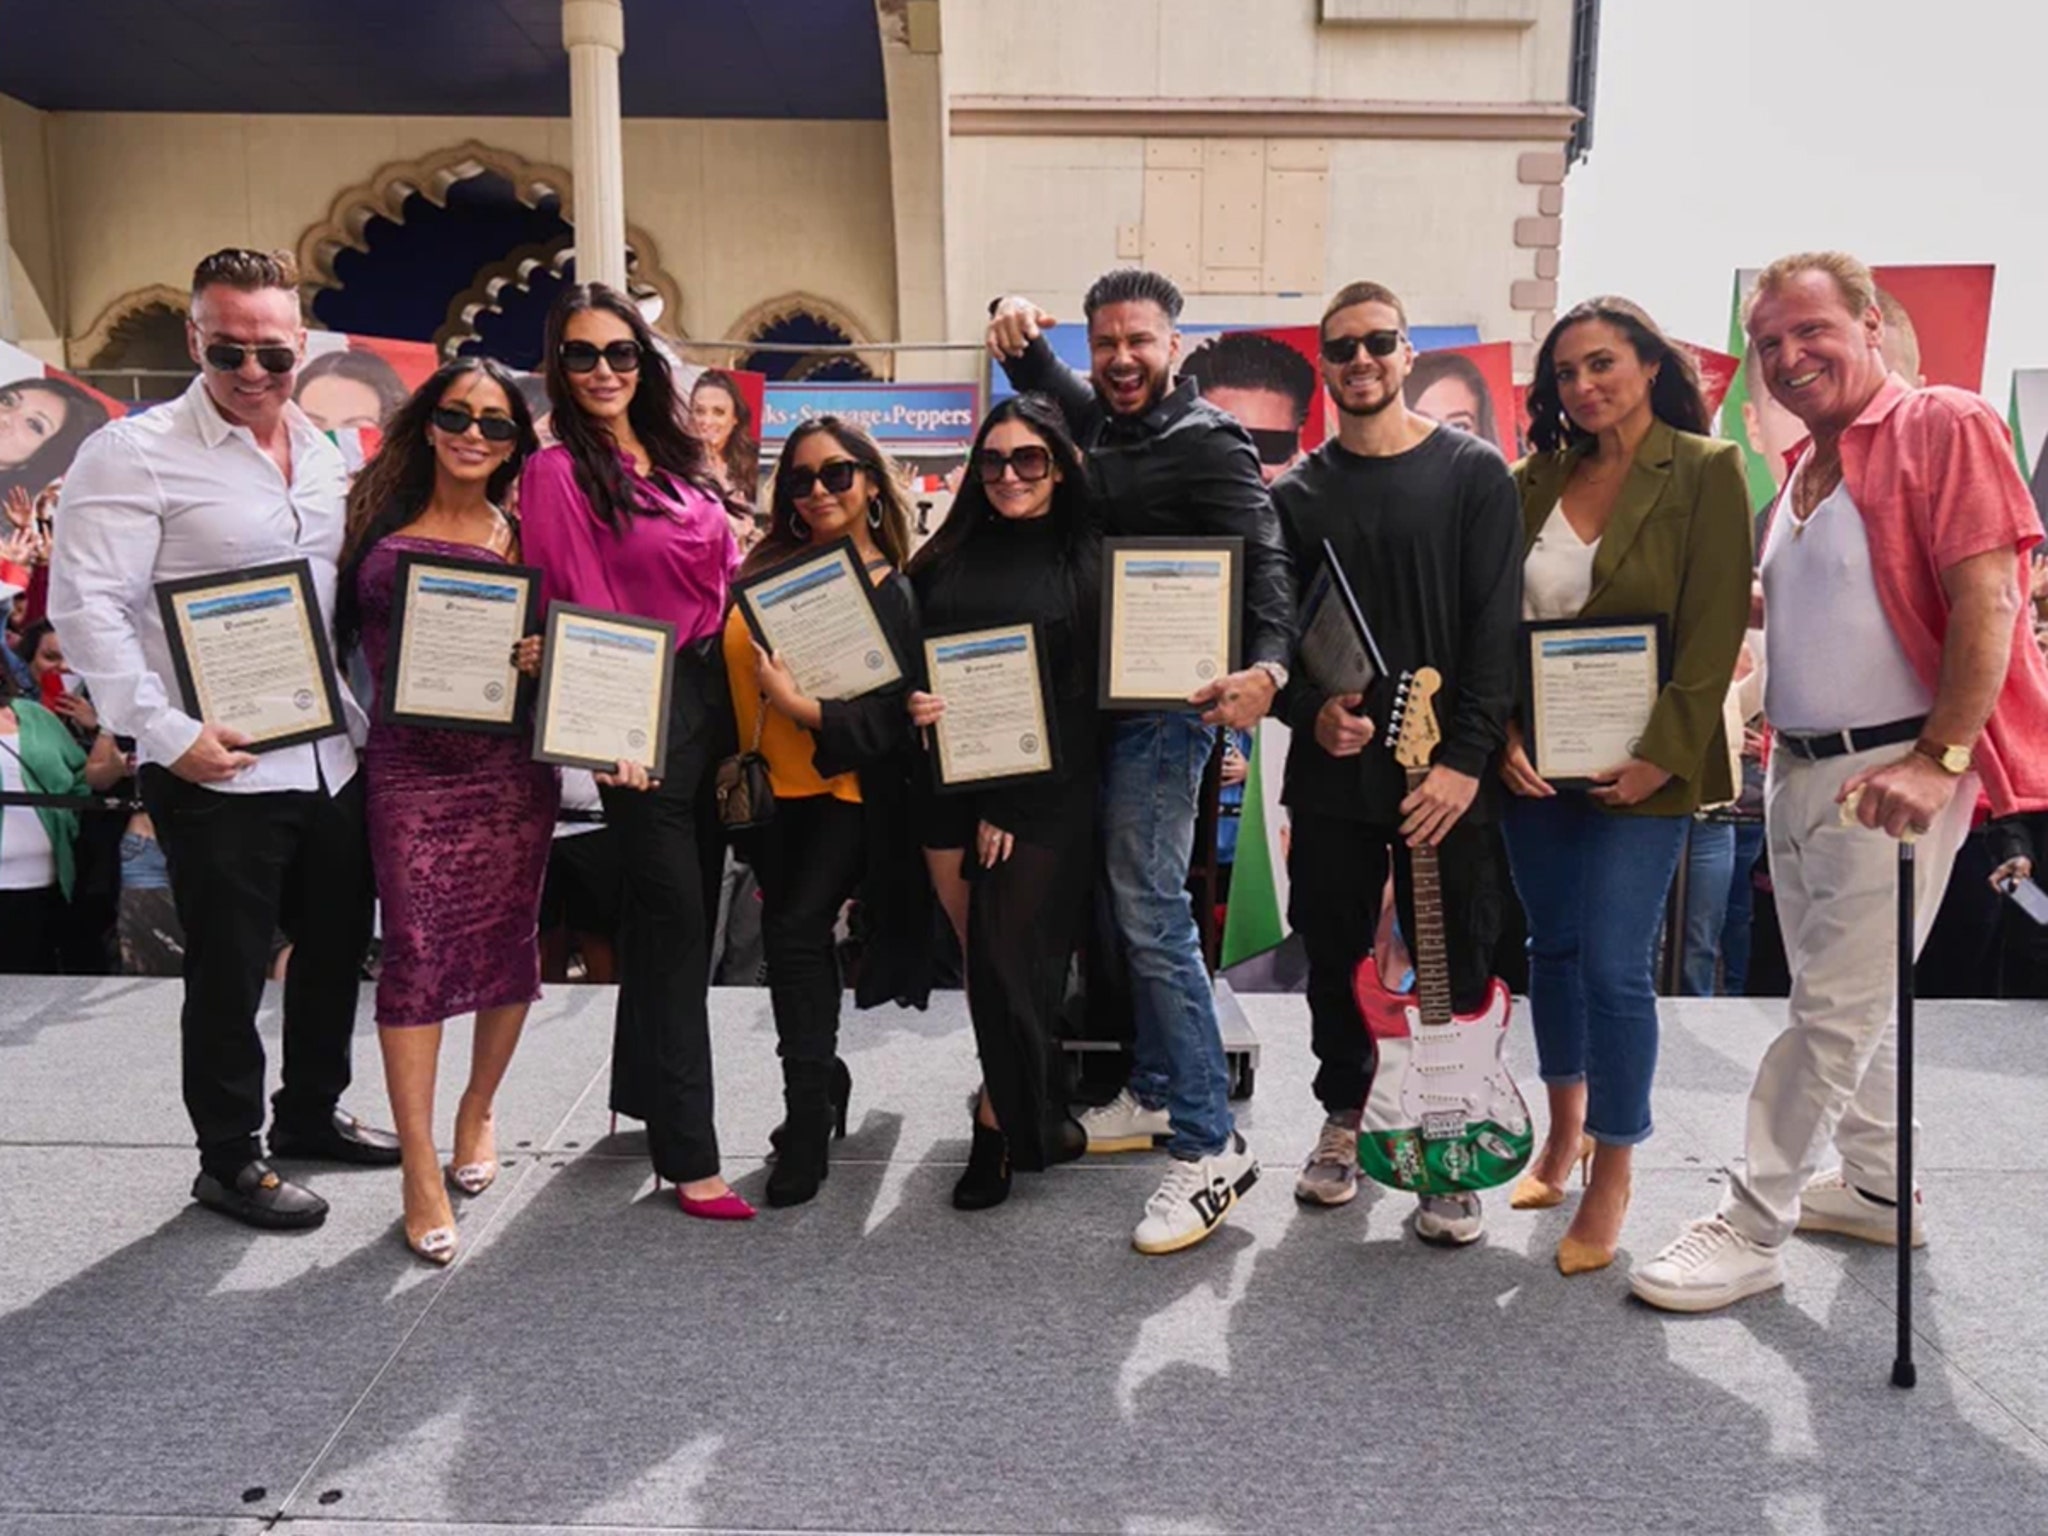 Sept. 22 is now 'Jersey Shore' Day in Atlantic City, in honor of